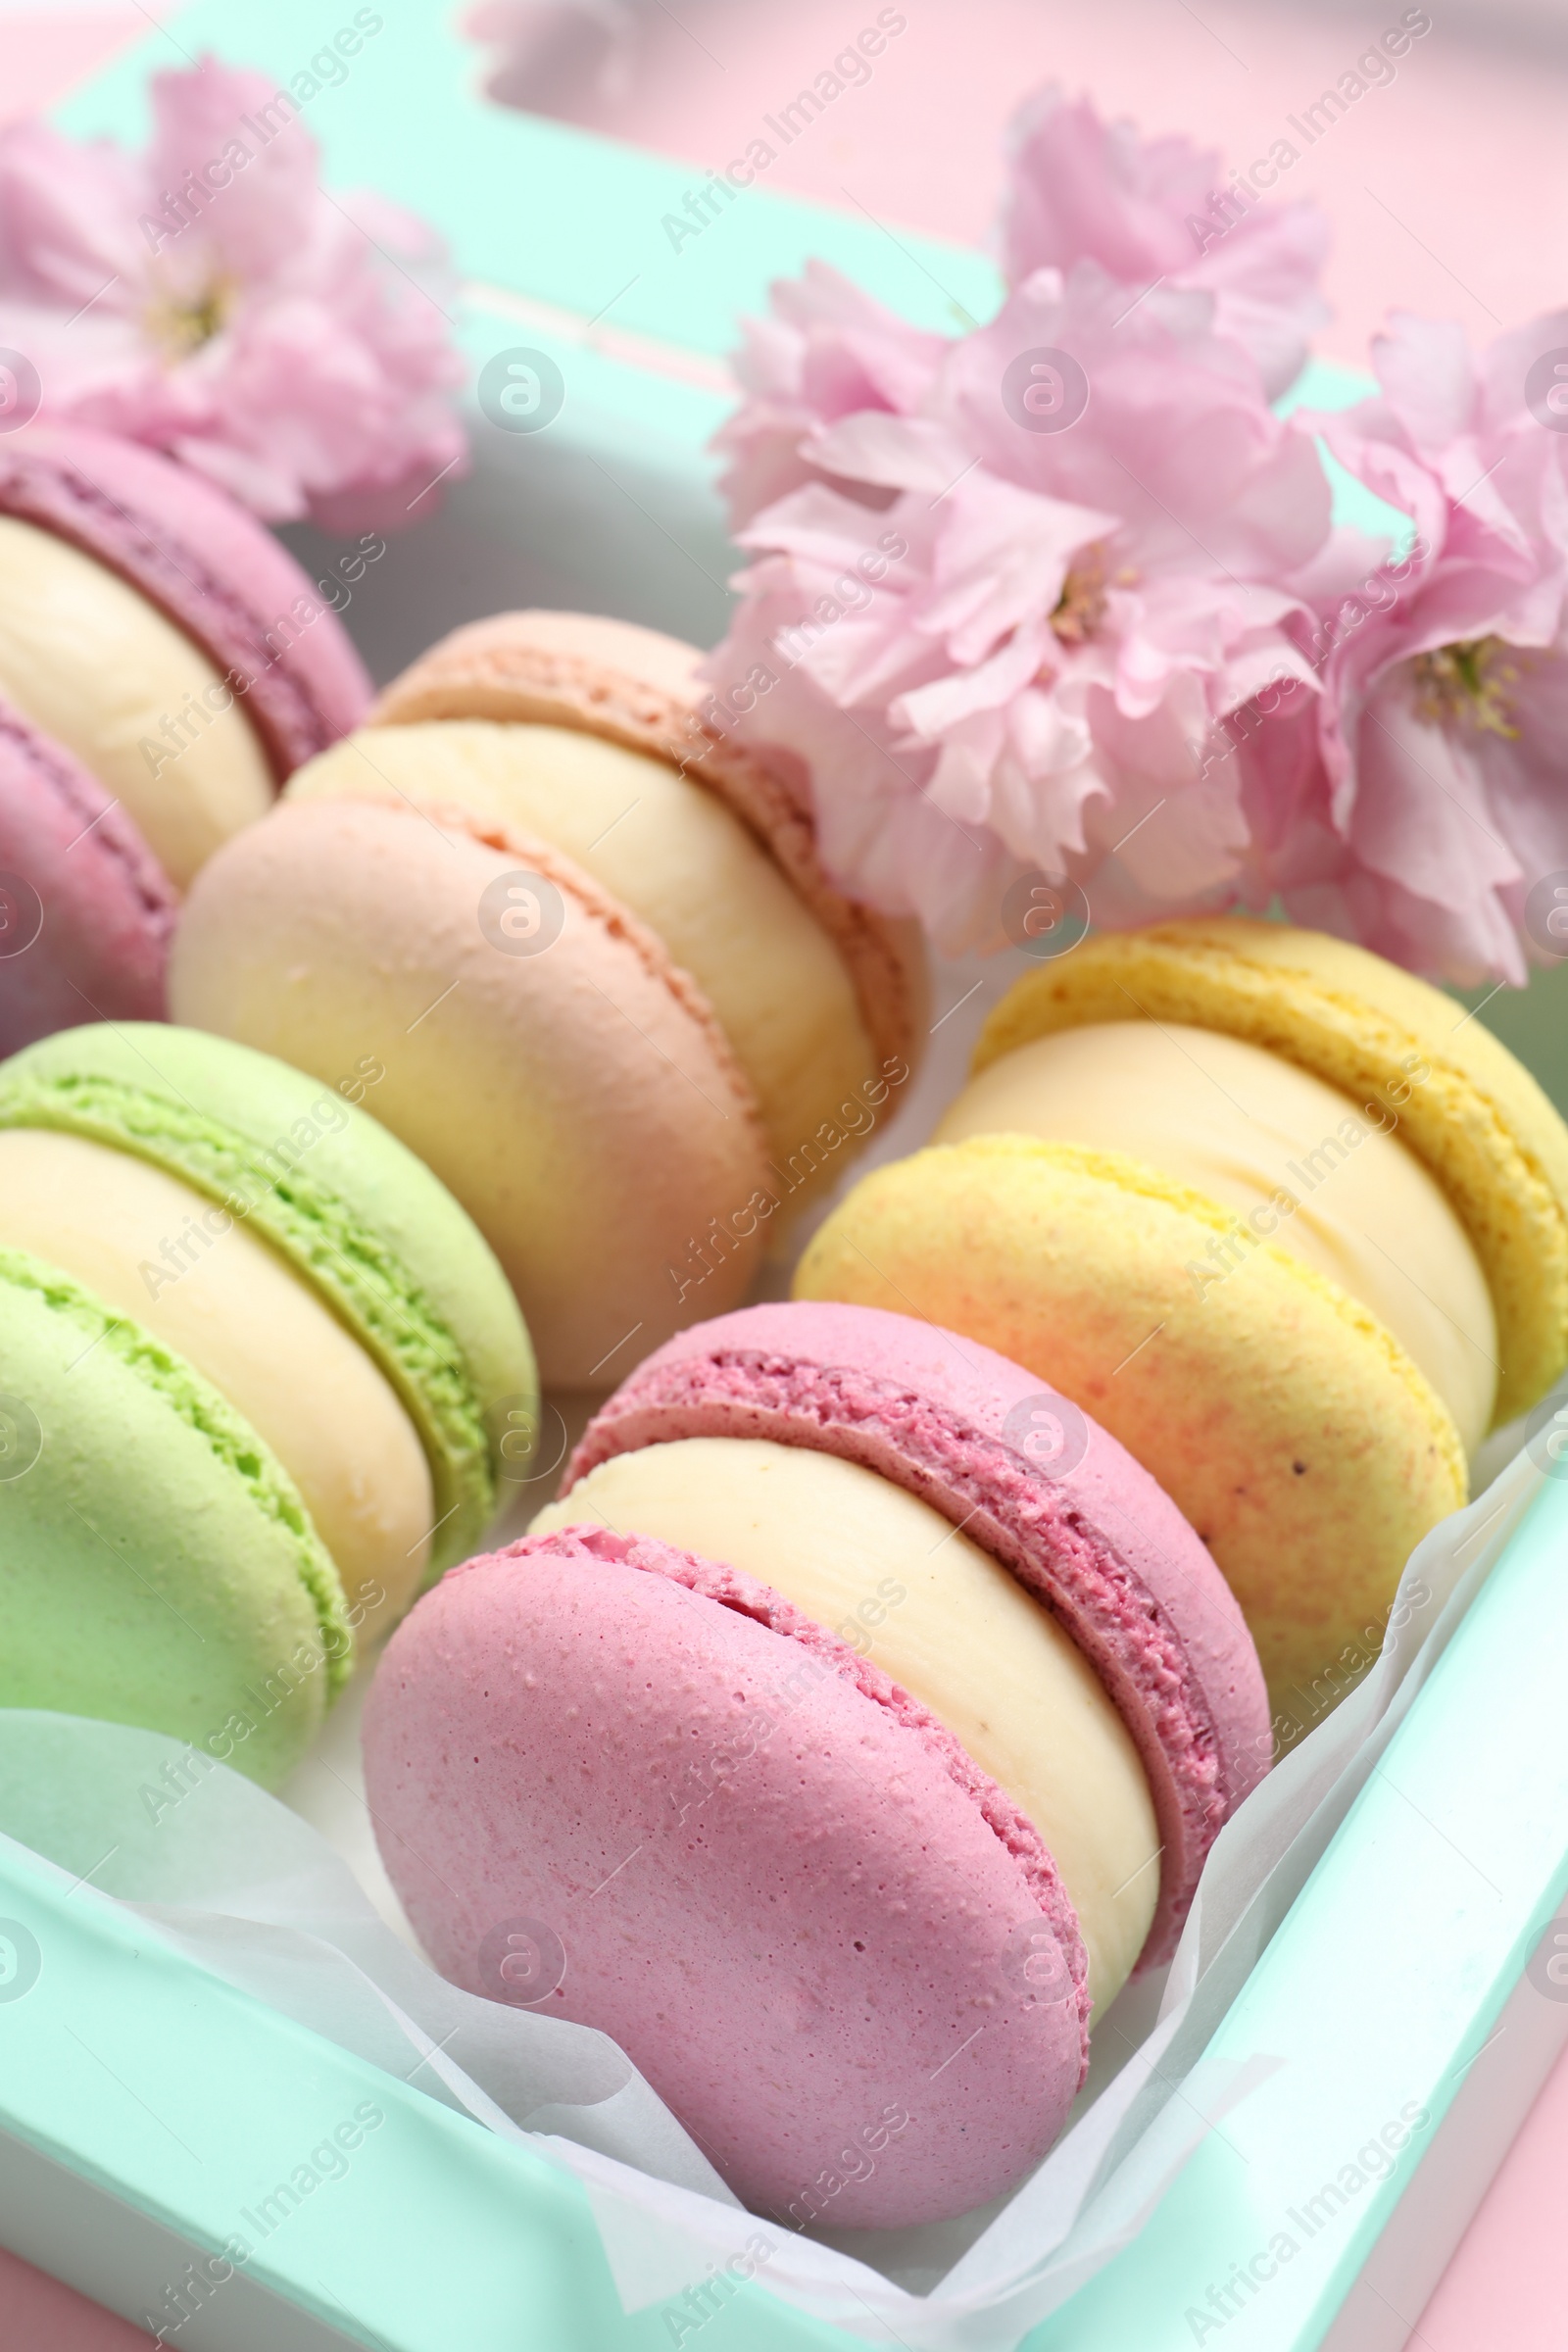 Photo of Many delicious colorful macarons in box and flowers on pink background, closeup